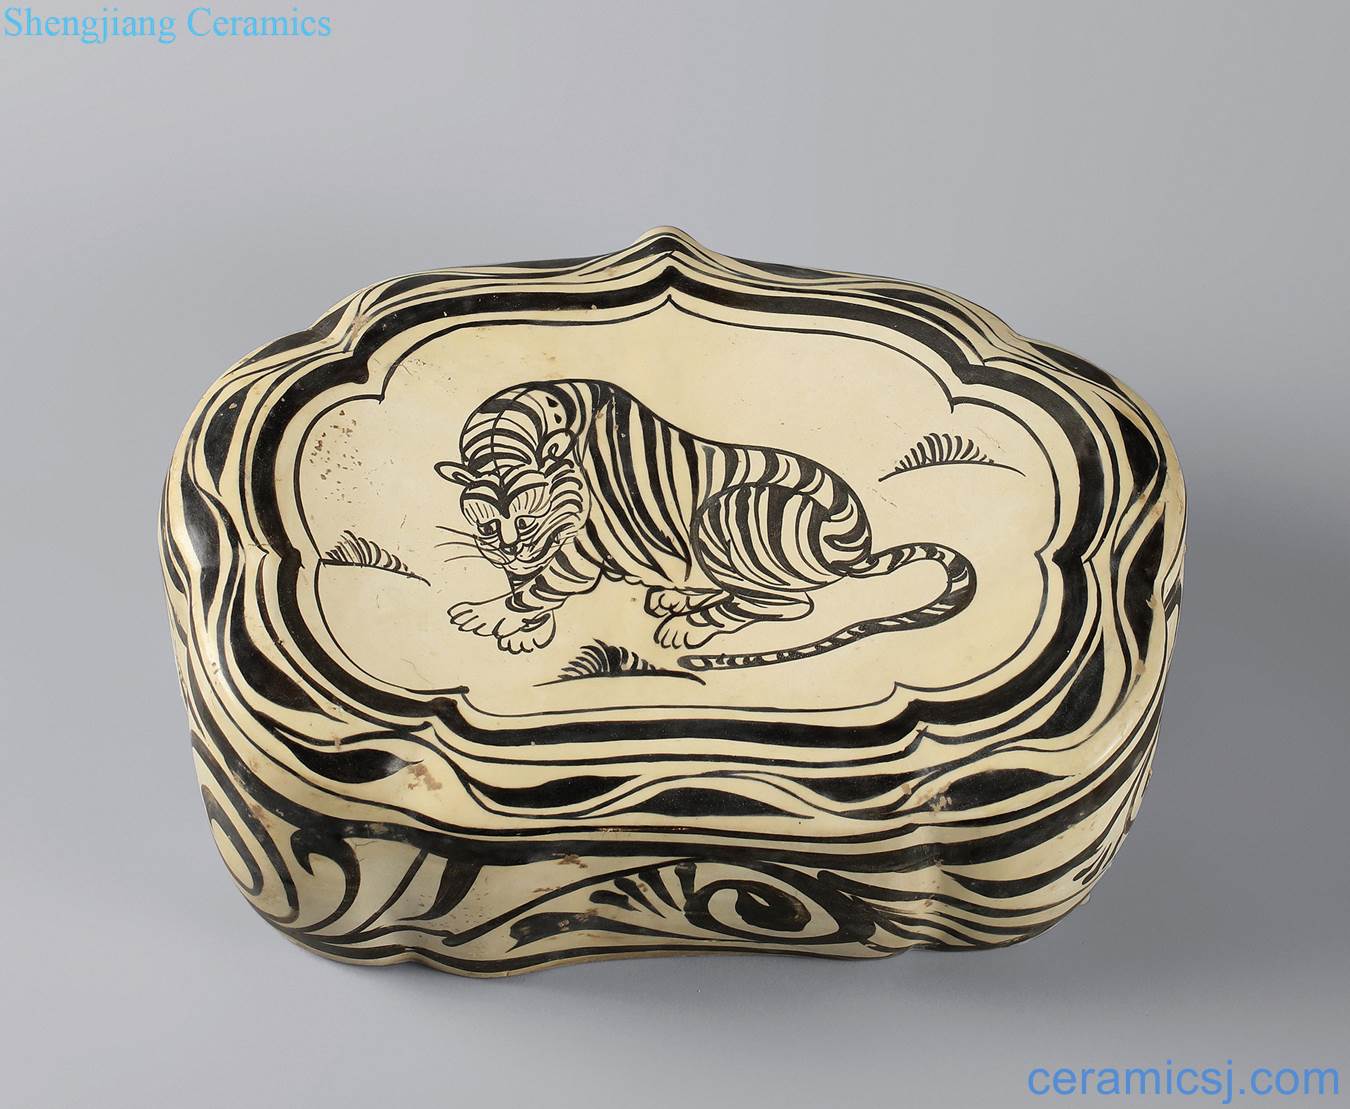 Northern song dynasty (960-1127) and gold (1115-1234) magnetic state kiln water color black tiger stripes ruyi shaped pillow